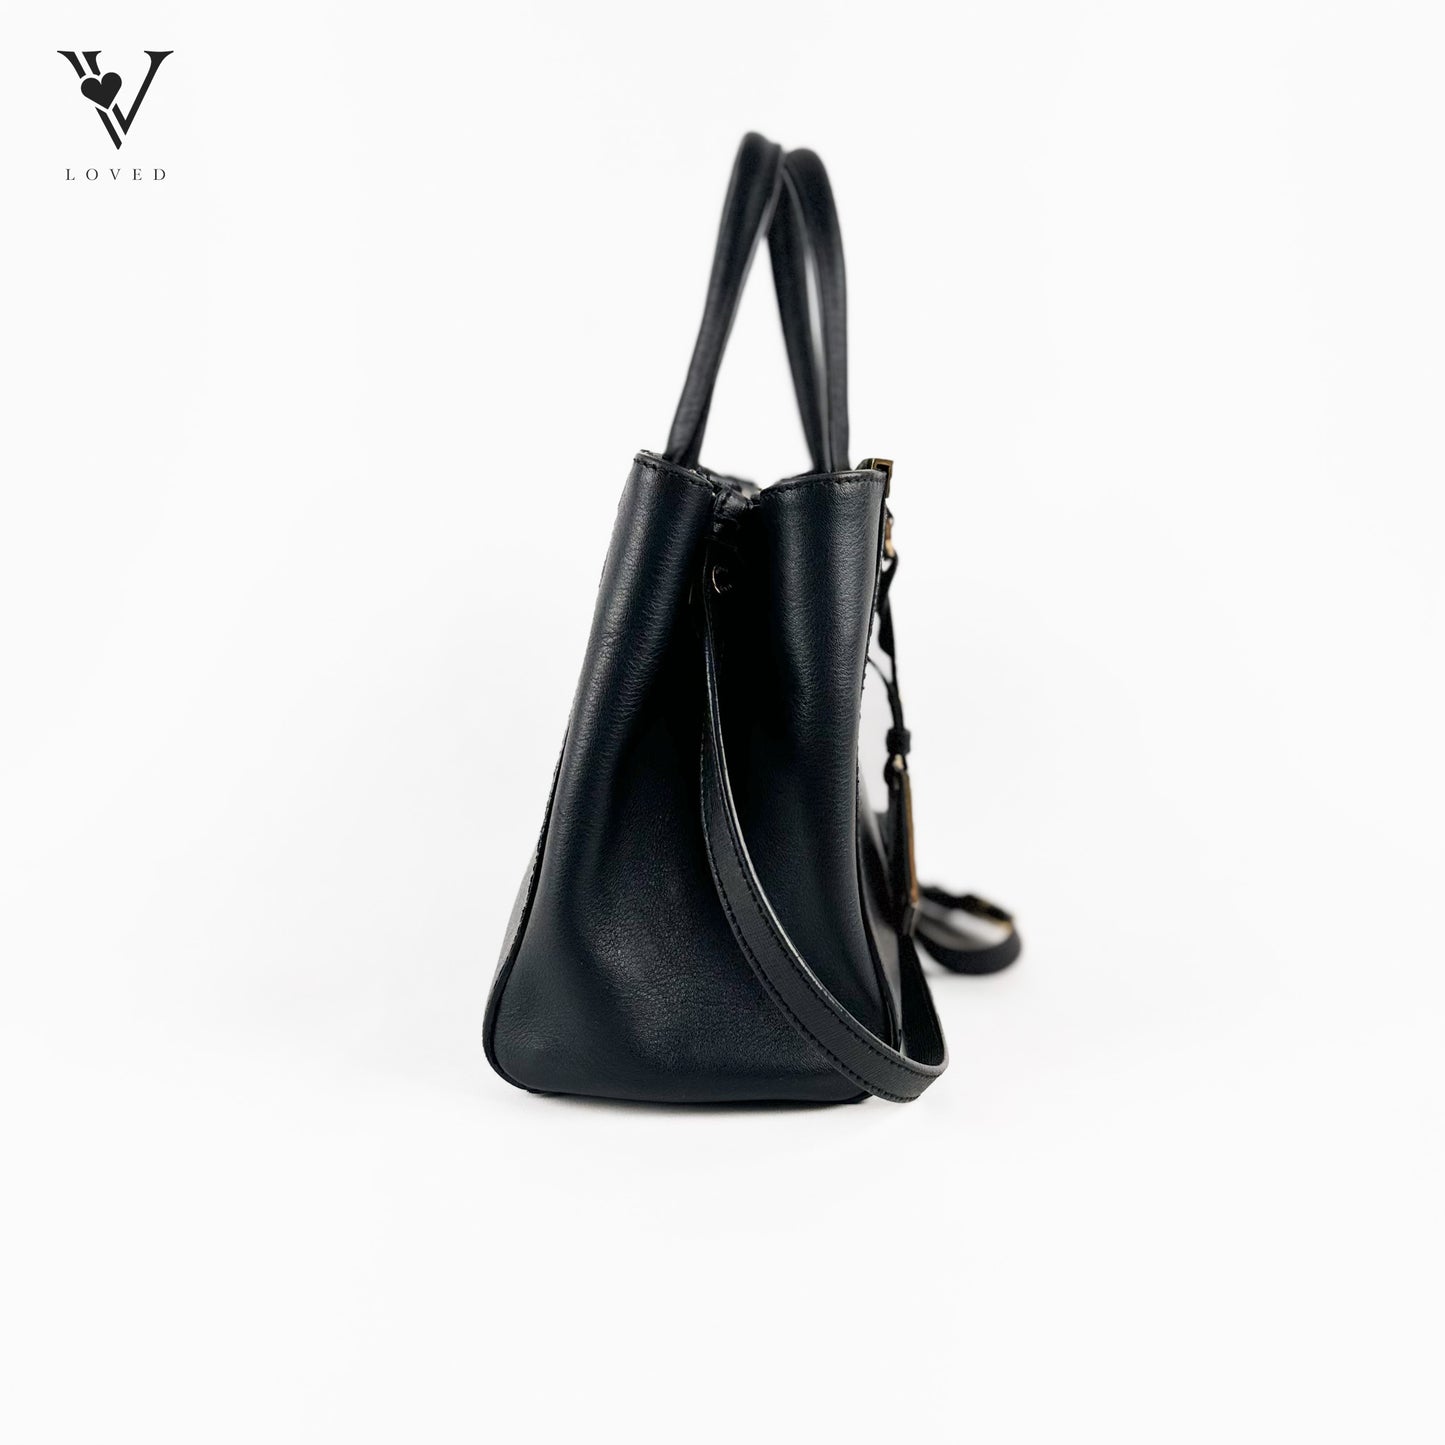 2Jours in Black Leather Two-Way Handbag